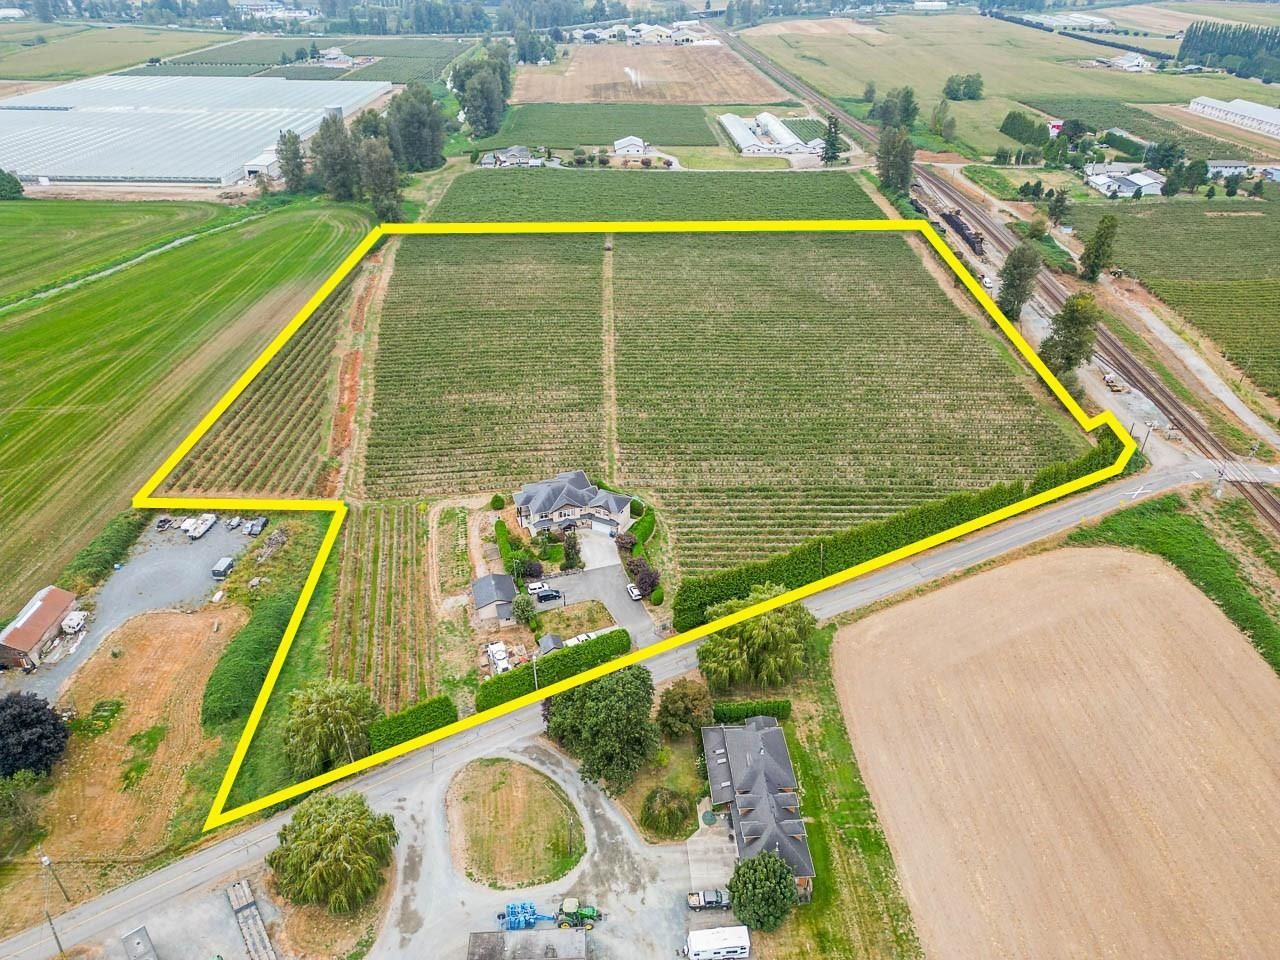 Main Photo: 6277 BELL Road in Abbotsford: Matsqui Agri-Business for sale : MLS®# C8049742